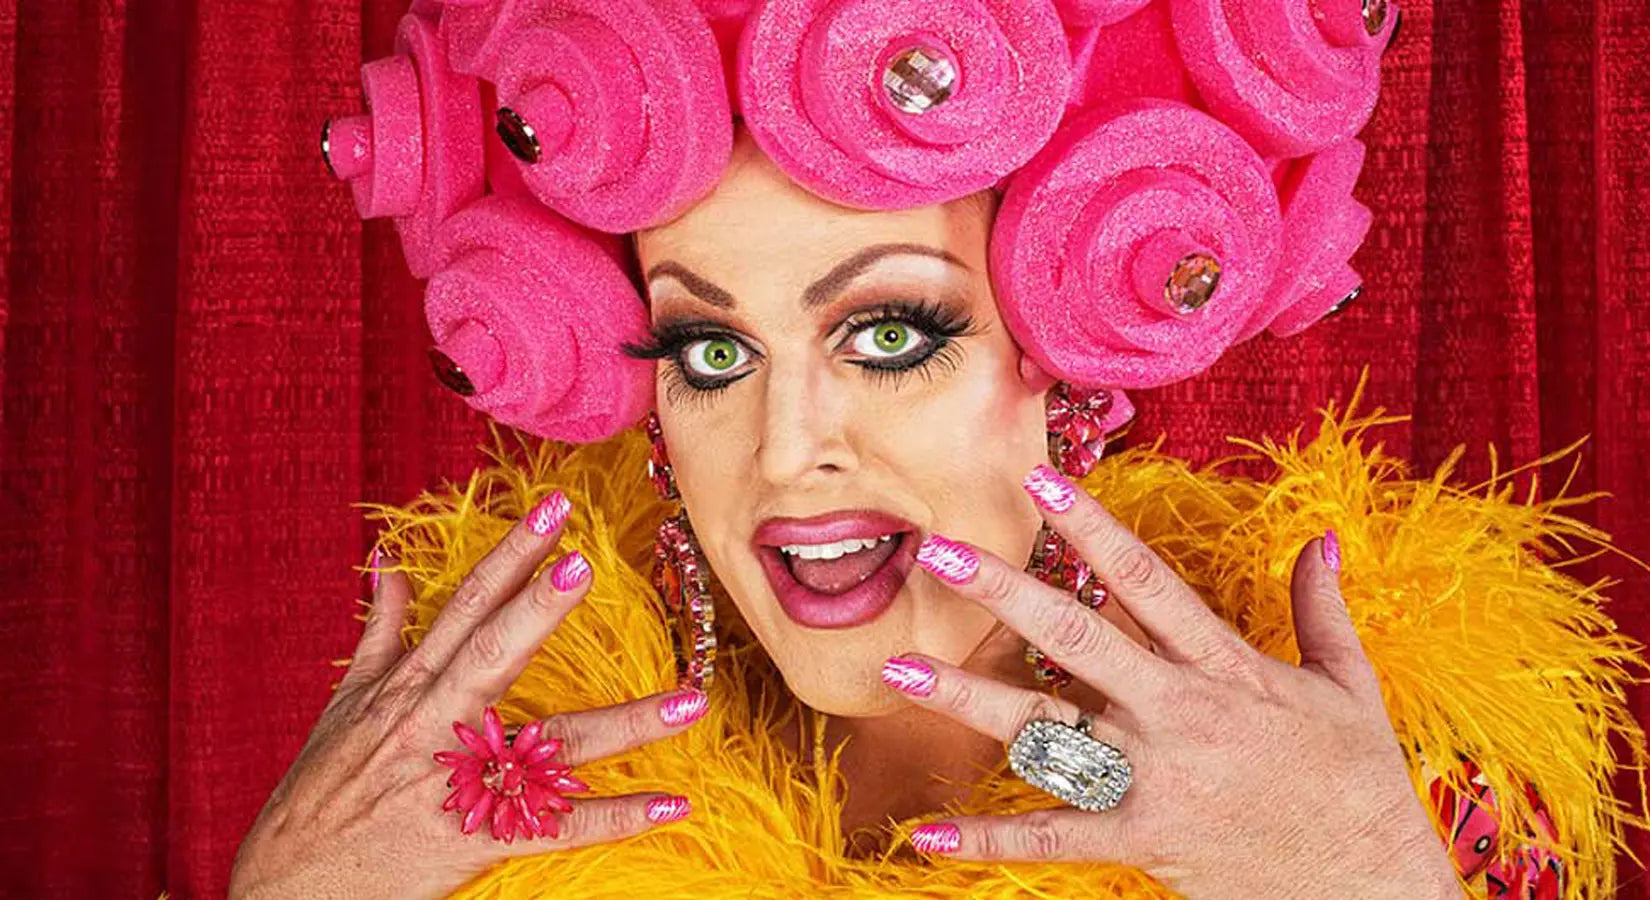 Festive Drag Queen Ornaments For Your Holiday Décor